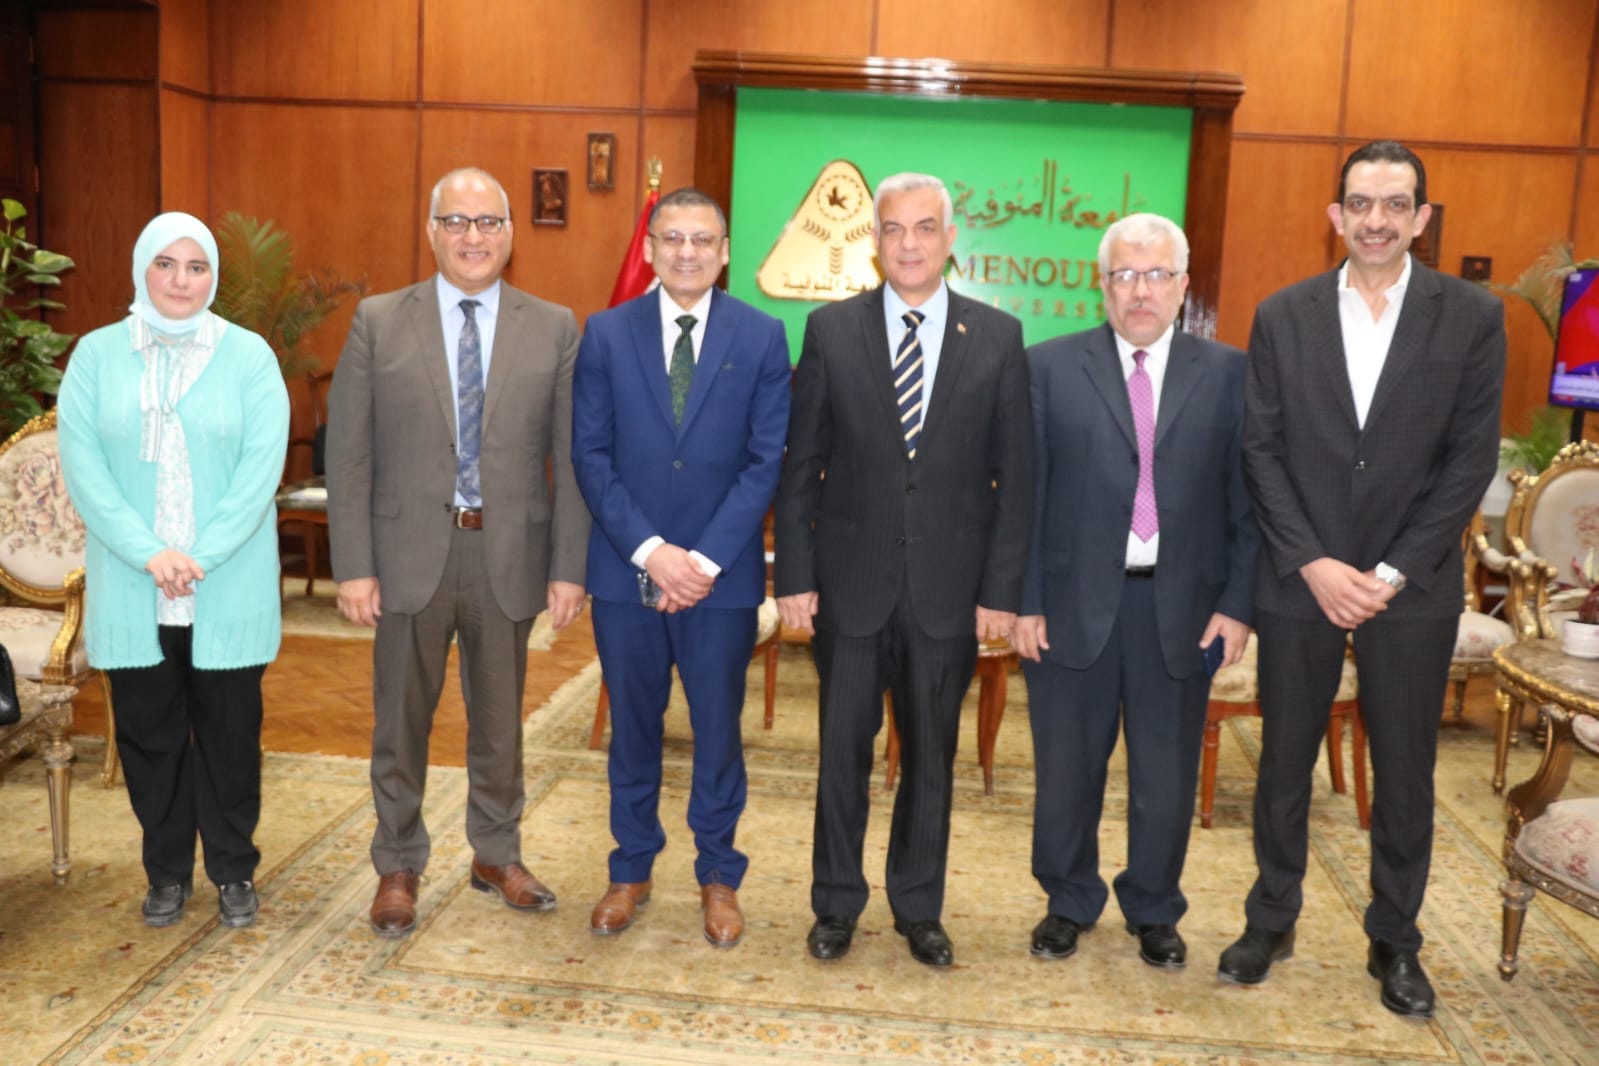 The president of the university meets the research team at Menoufia University Hospitals